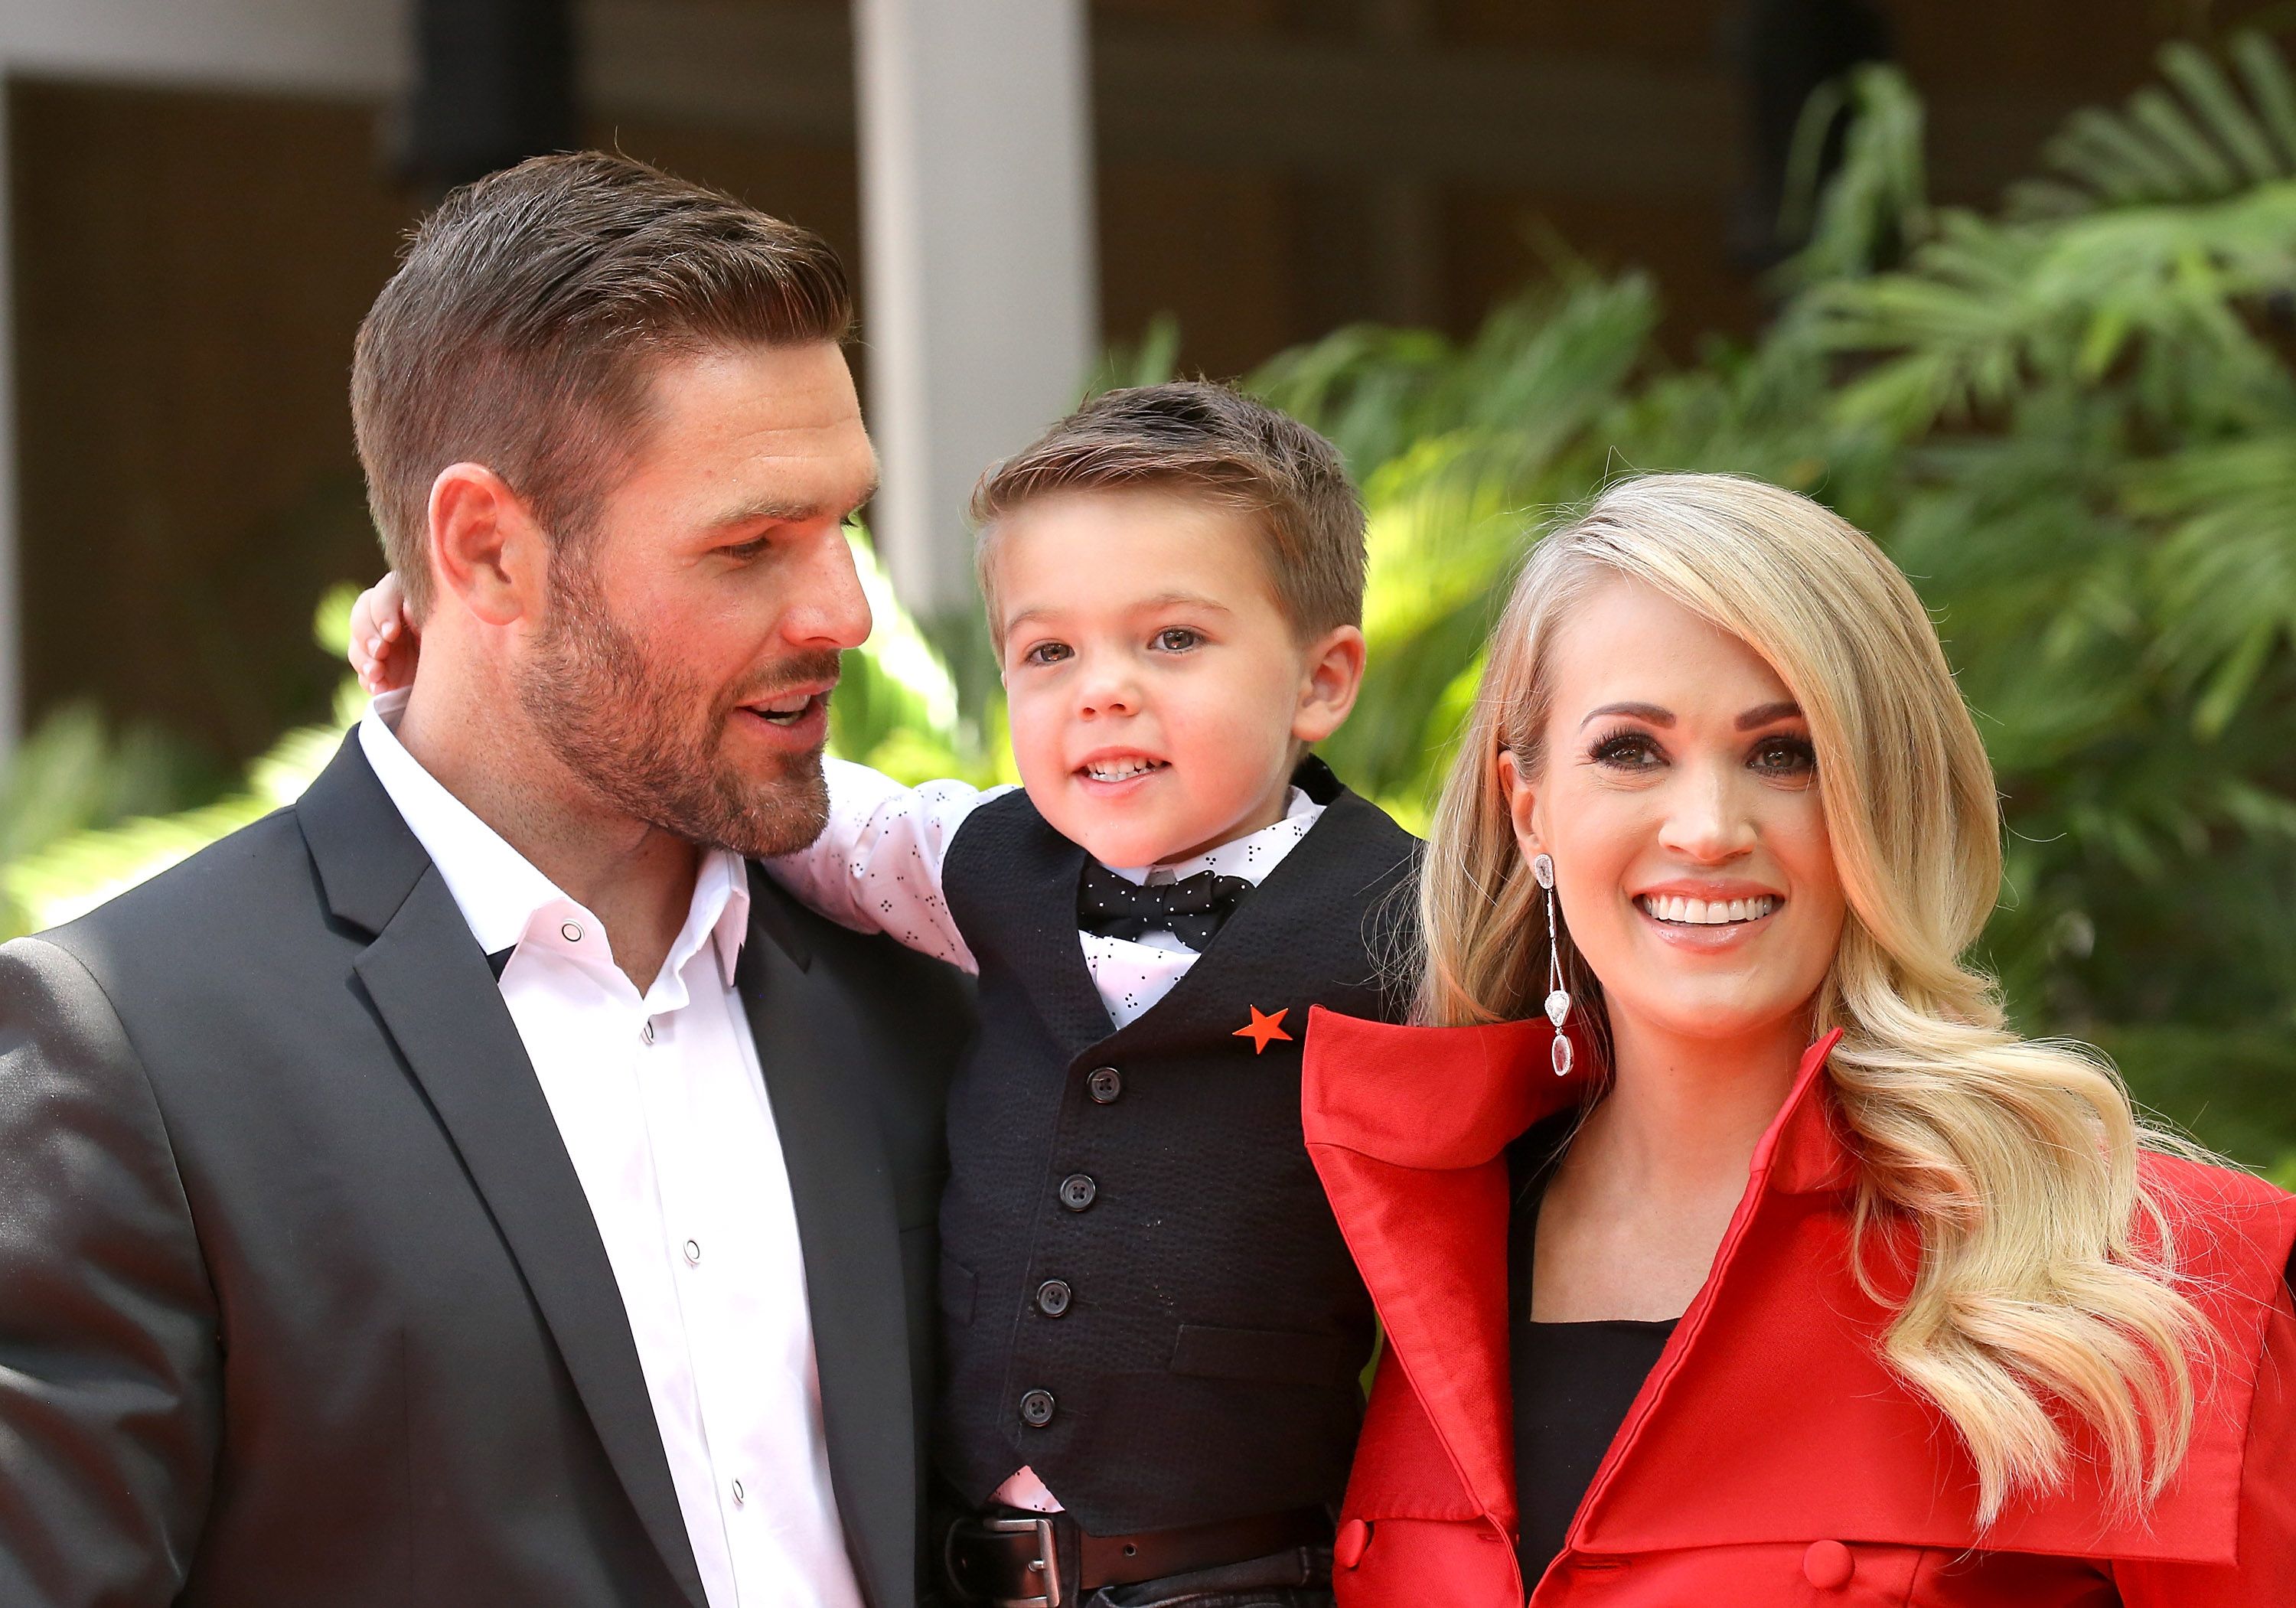 Carrie Underwood, Mike Fisher and their son, Isaiah Michael Fisher on September 20, 2018 in California. | Photo: Getty Images 